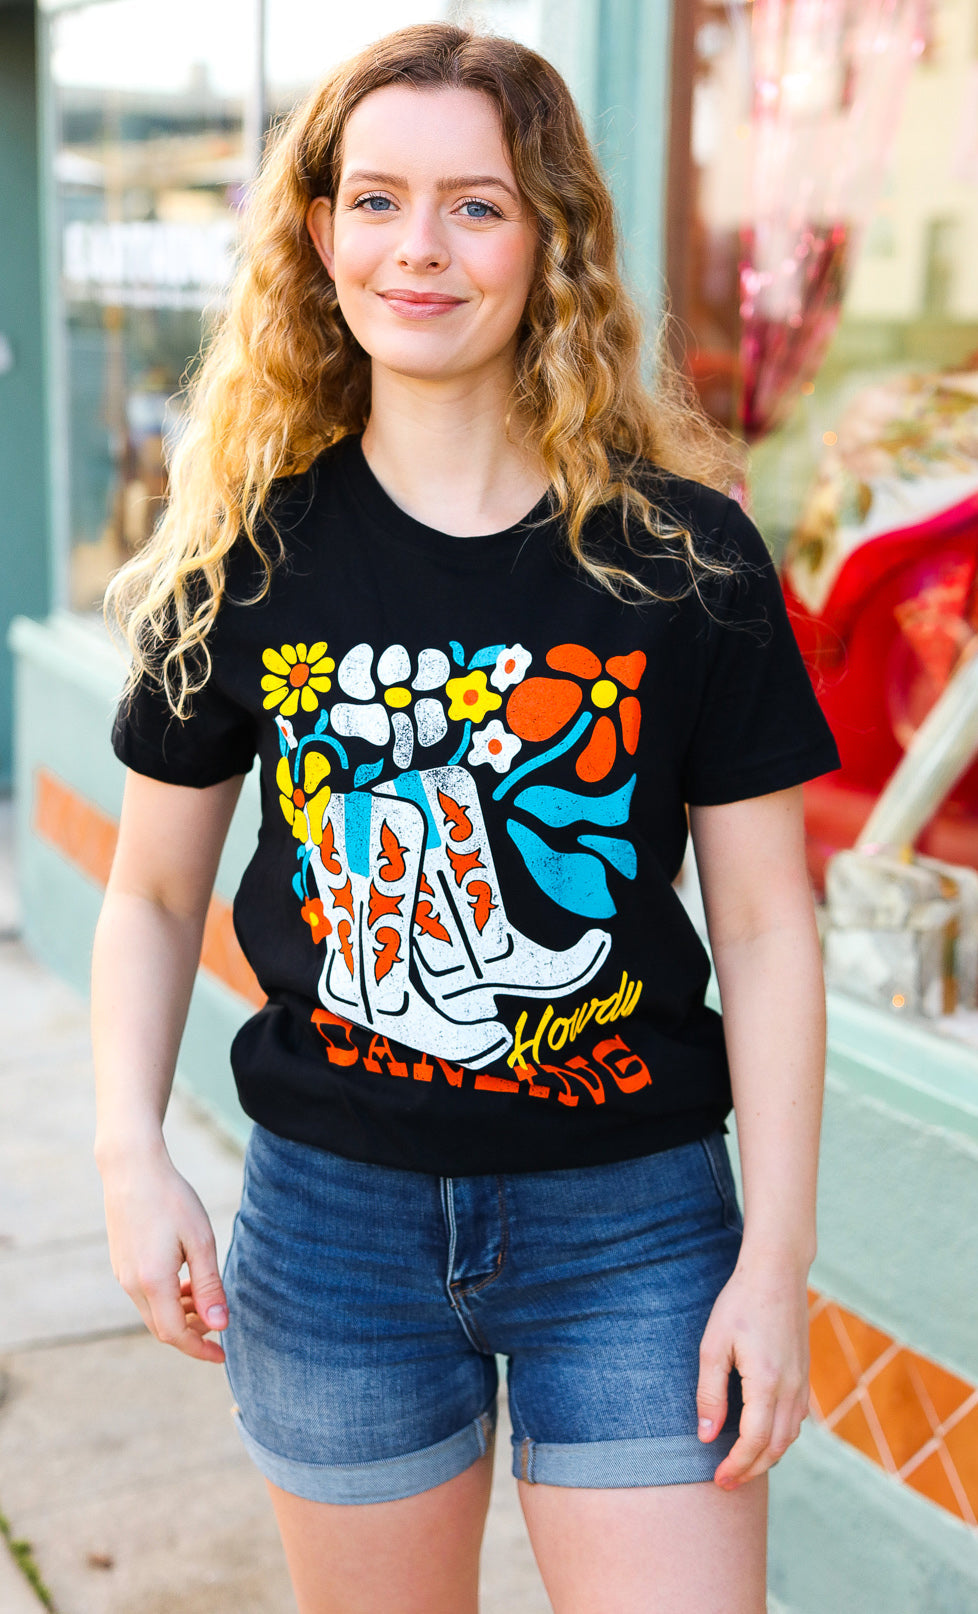 Black Cotton HOWDY DARLING Graphic Tee BOU TEE QUE